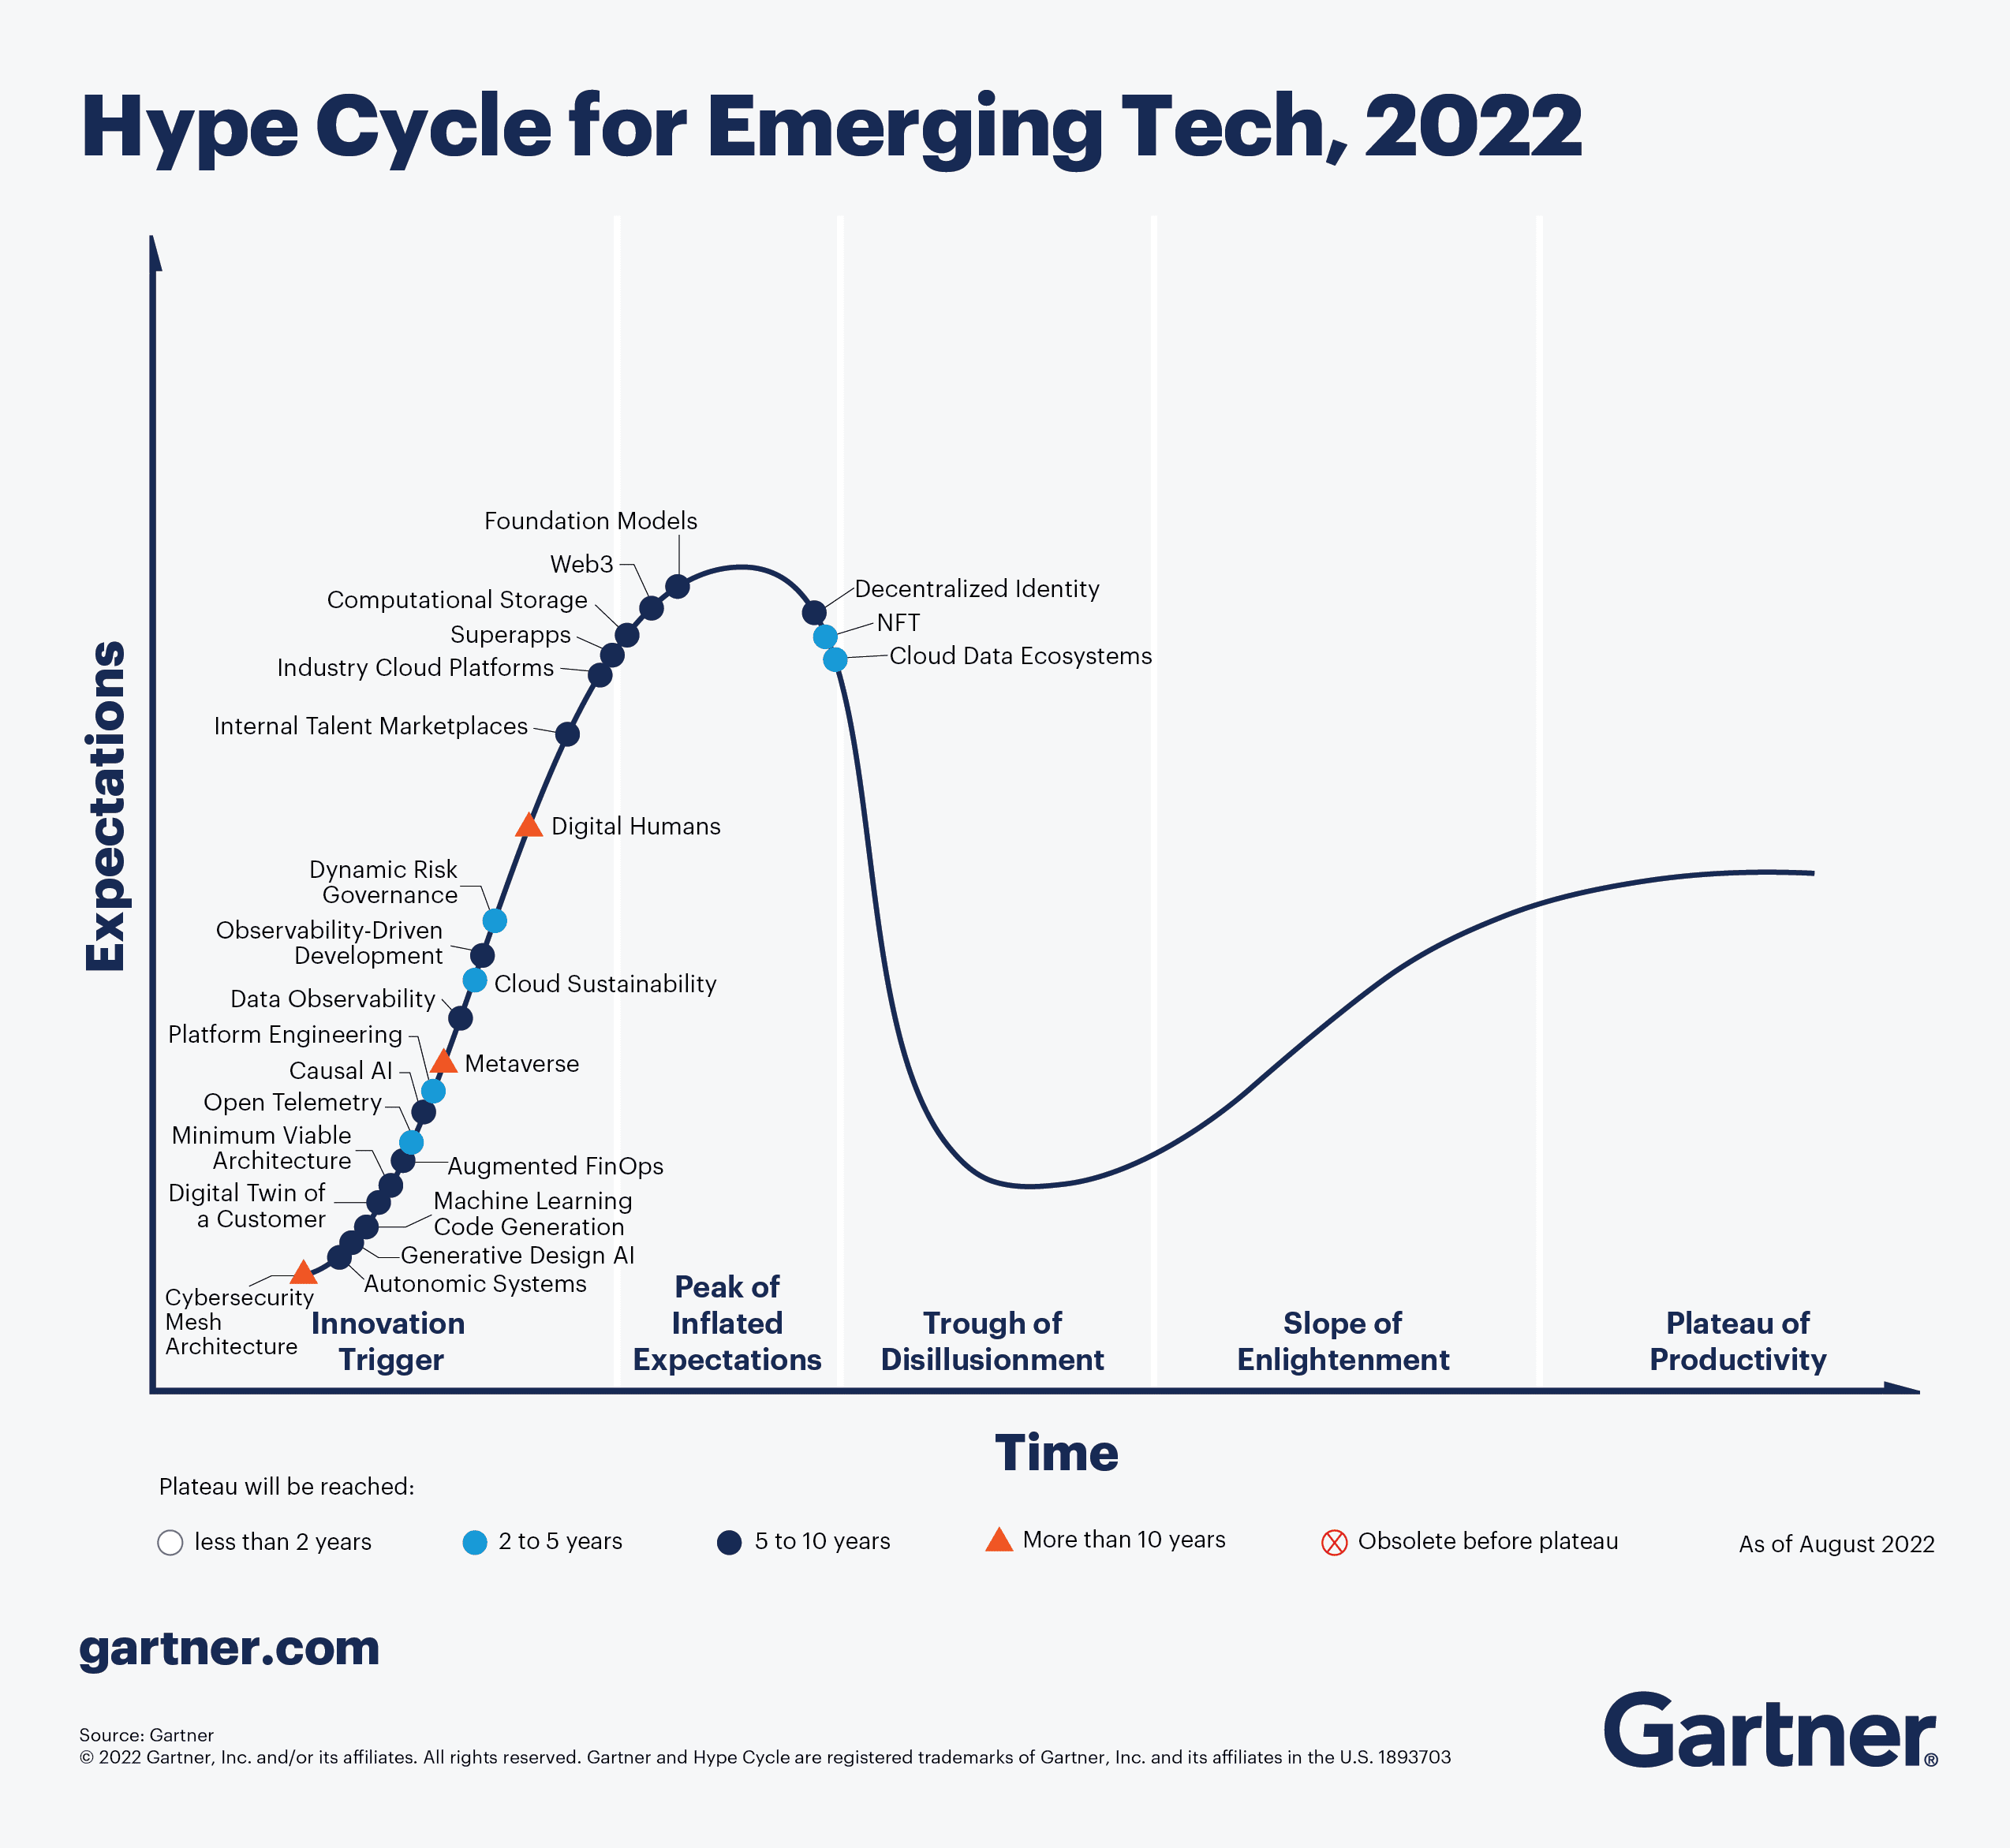 Image source: Gartner (August 2022). Hype Cycle for Emerging Technologies, 2022